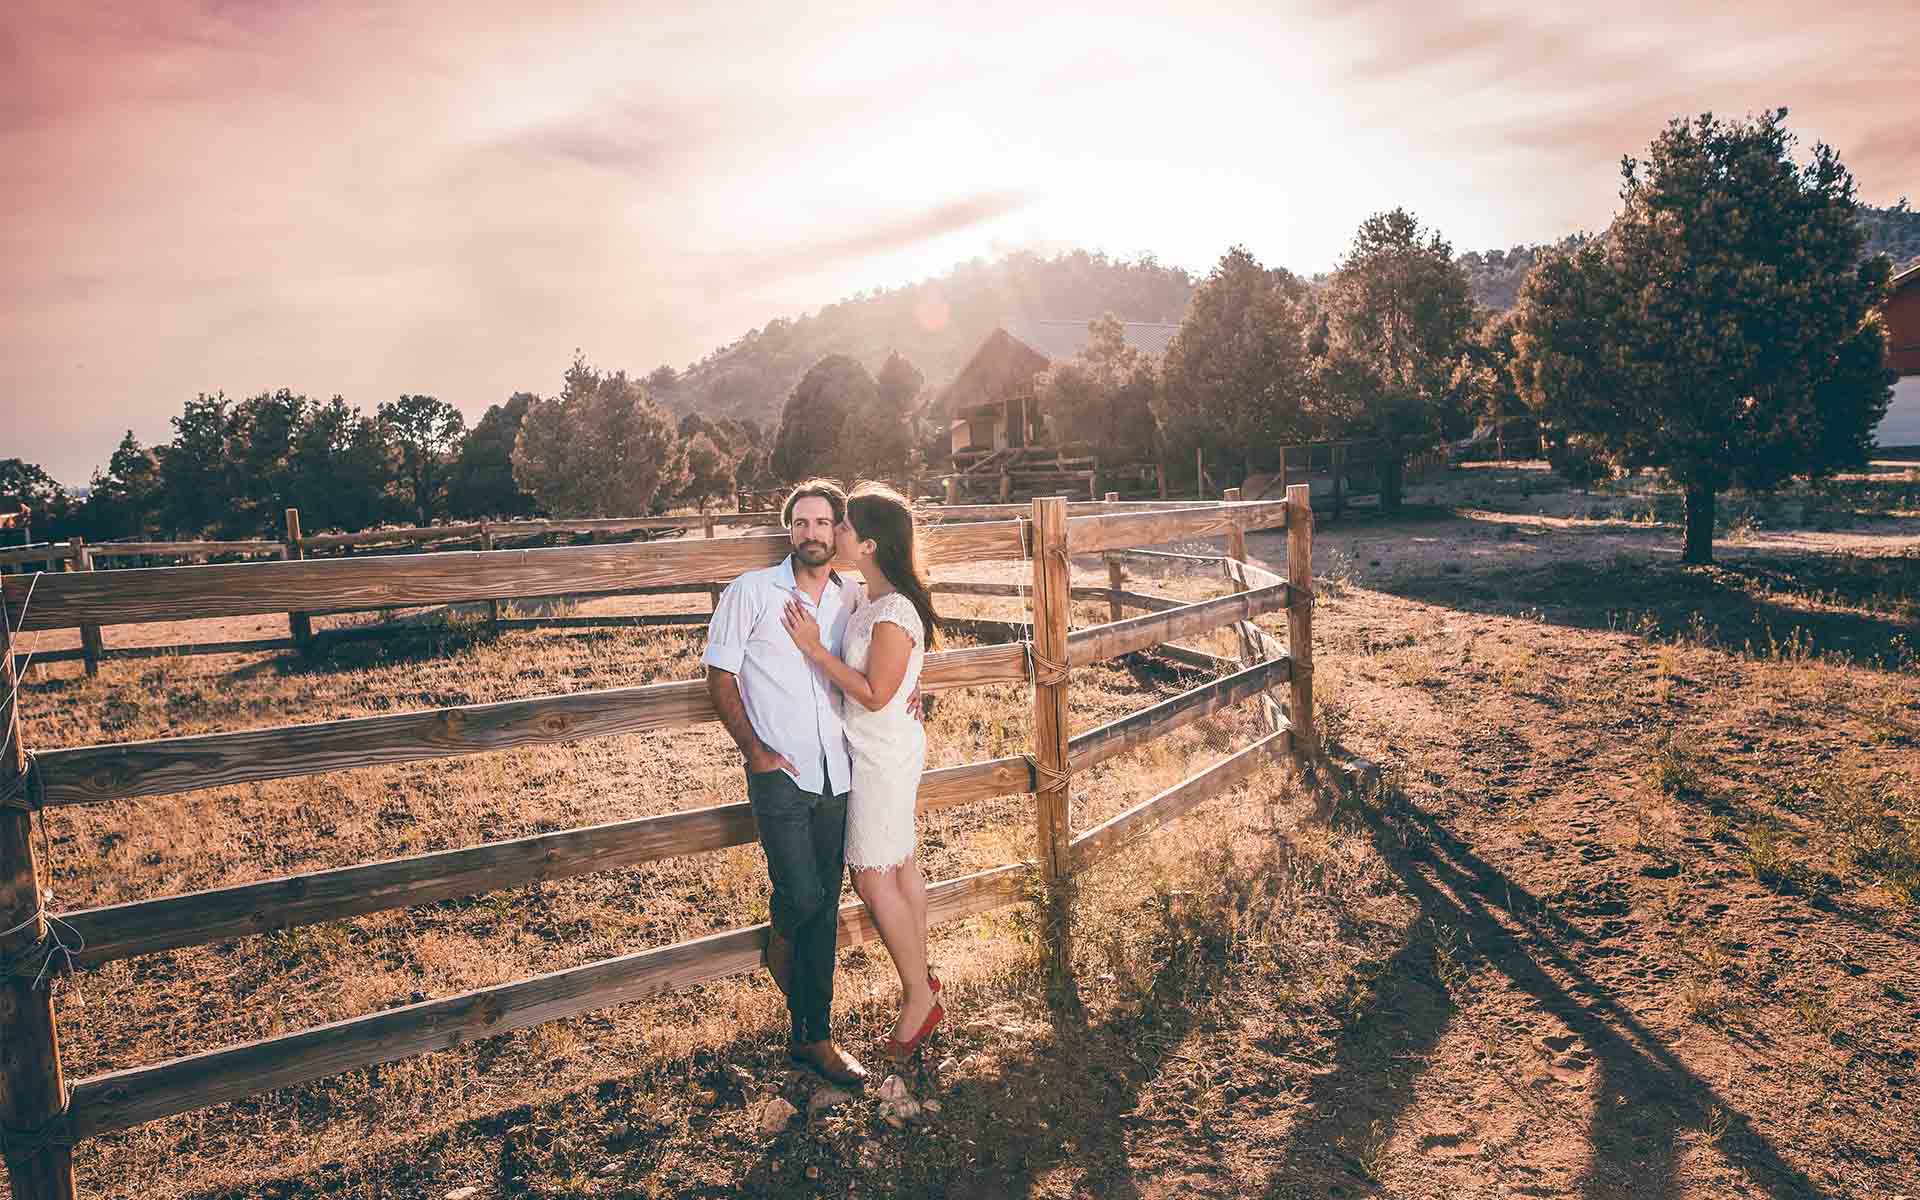 big bear ranch engagement session in california by jimmy bui photography